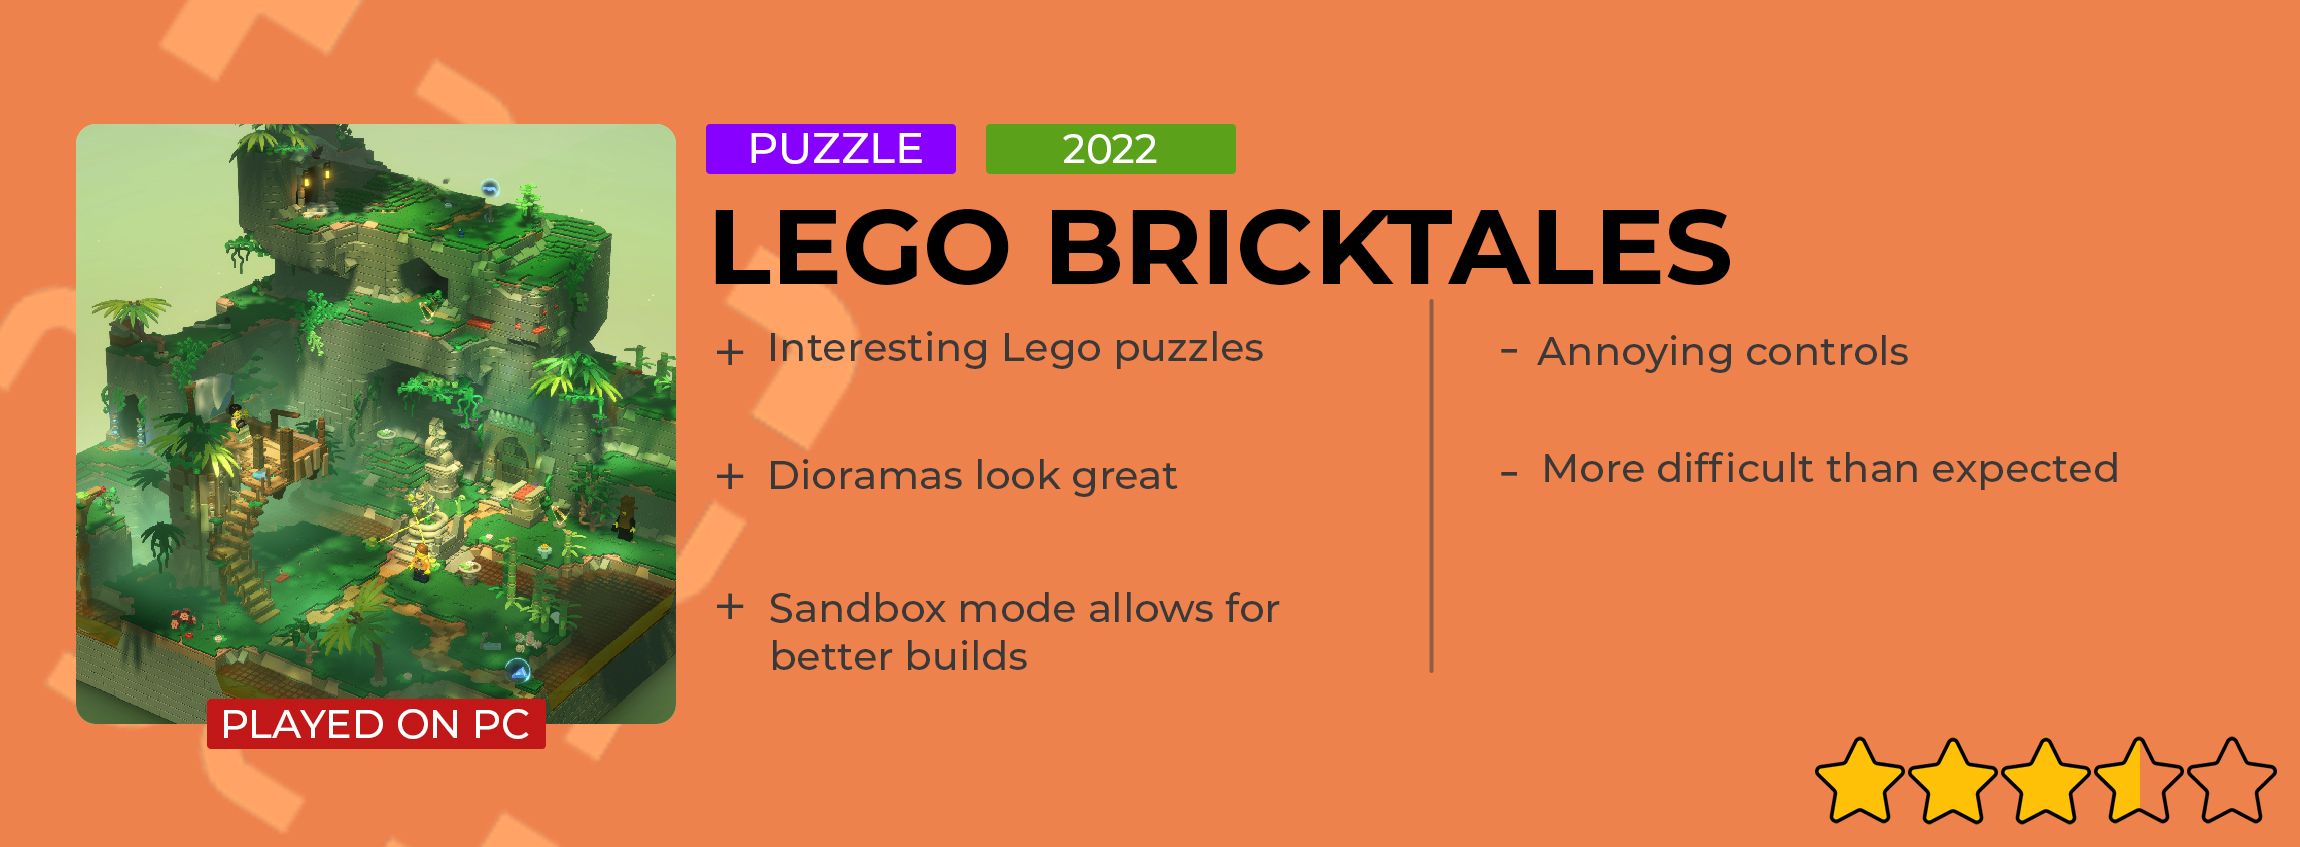 Lego Bricktales Review card